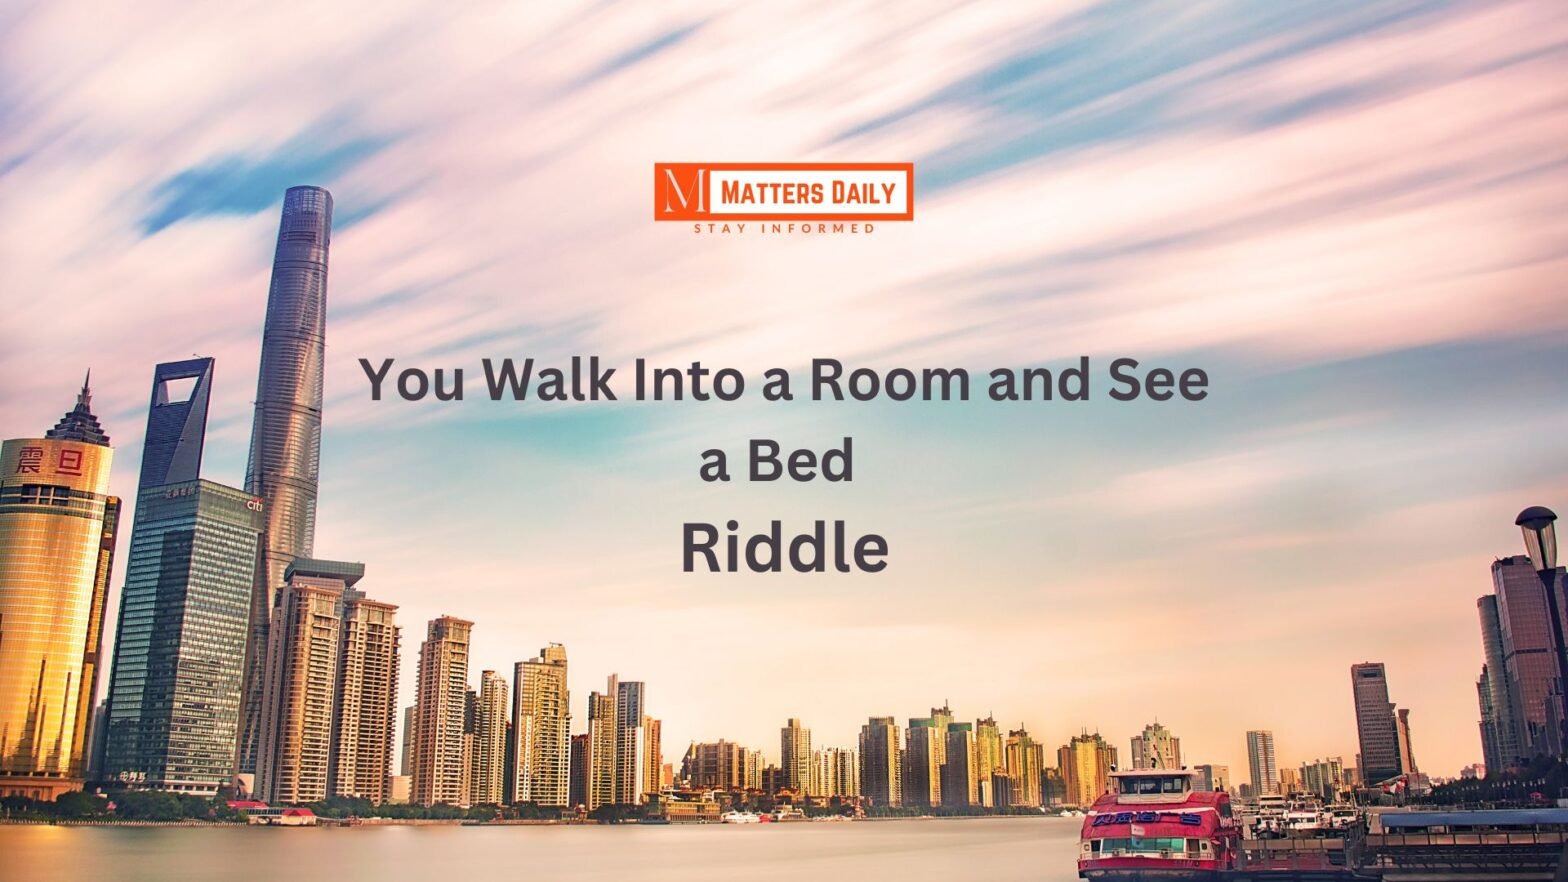 Unlocking the Mystery of the “You Walk Into a Room and See a Bed Riddle”